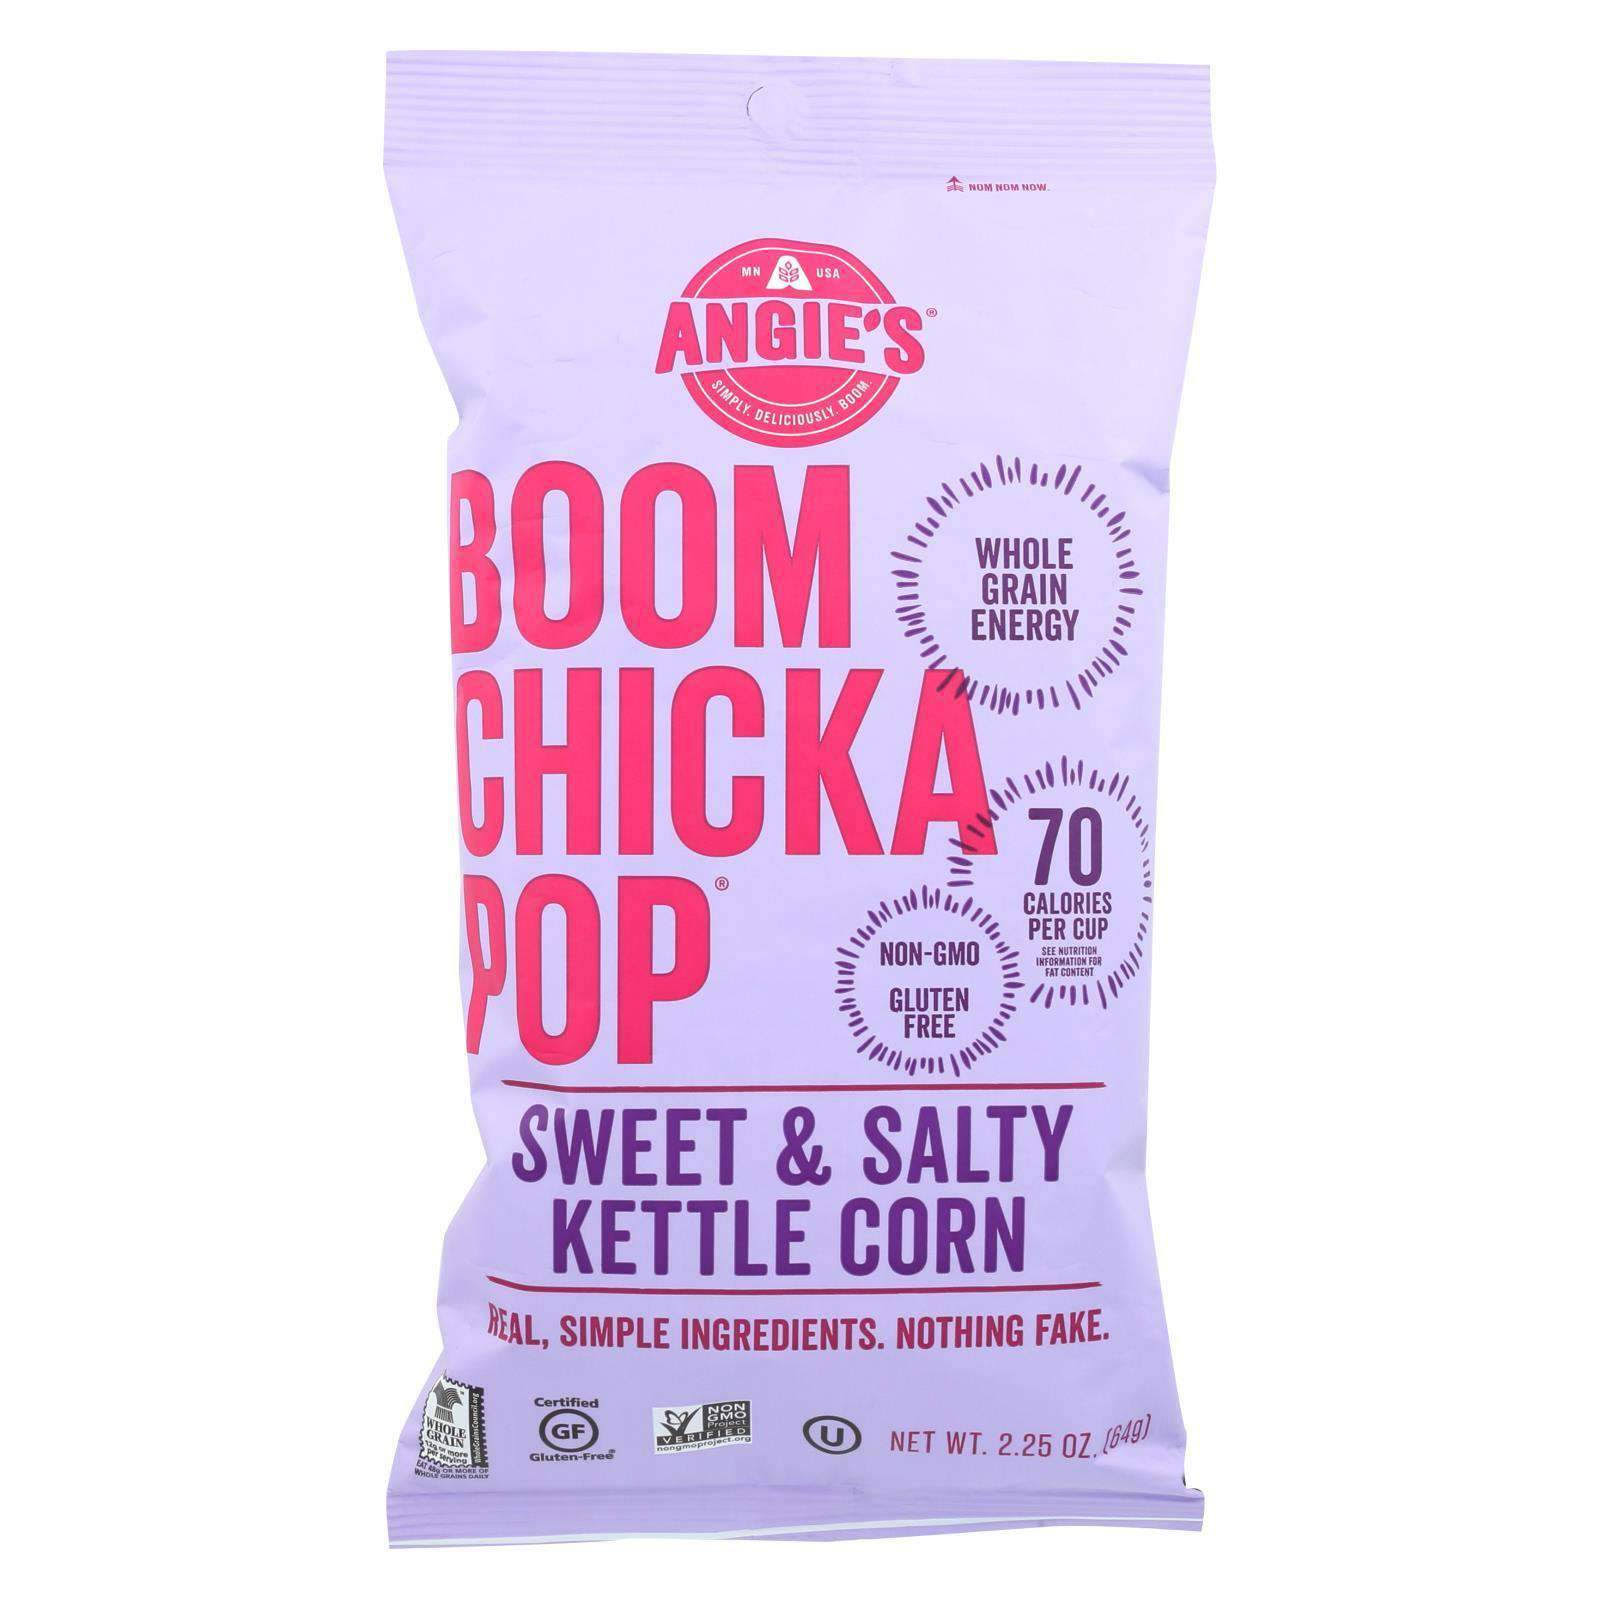 Angie's Boom Chicka Pop Kettle Corn, Sweet & Salty - 2.25 oz